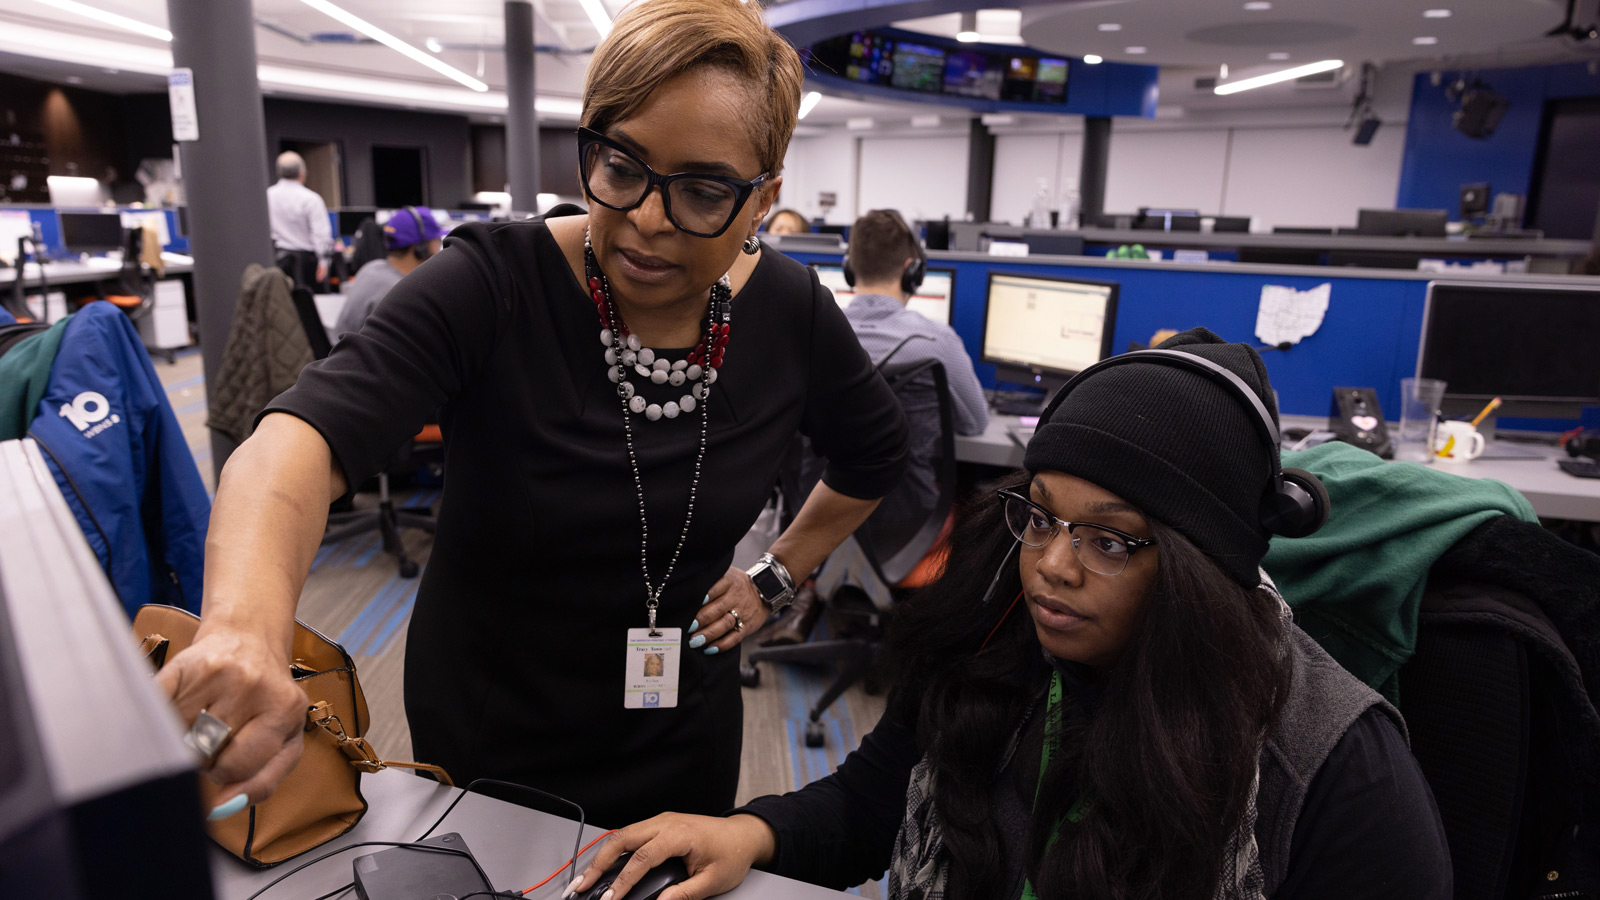 In a brightly lit newsroom, Tracy Townsend points to a computer monitor while working together with another woman sitting at the desk. They’re both wearing glasses and look focused. Tracy is in her on-camera clothes — a black sheath dress and a chunky necklace. The other woman wears a knit cap and vest.